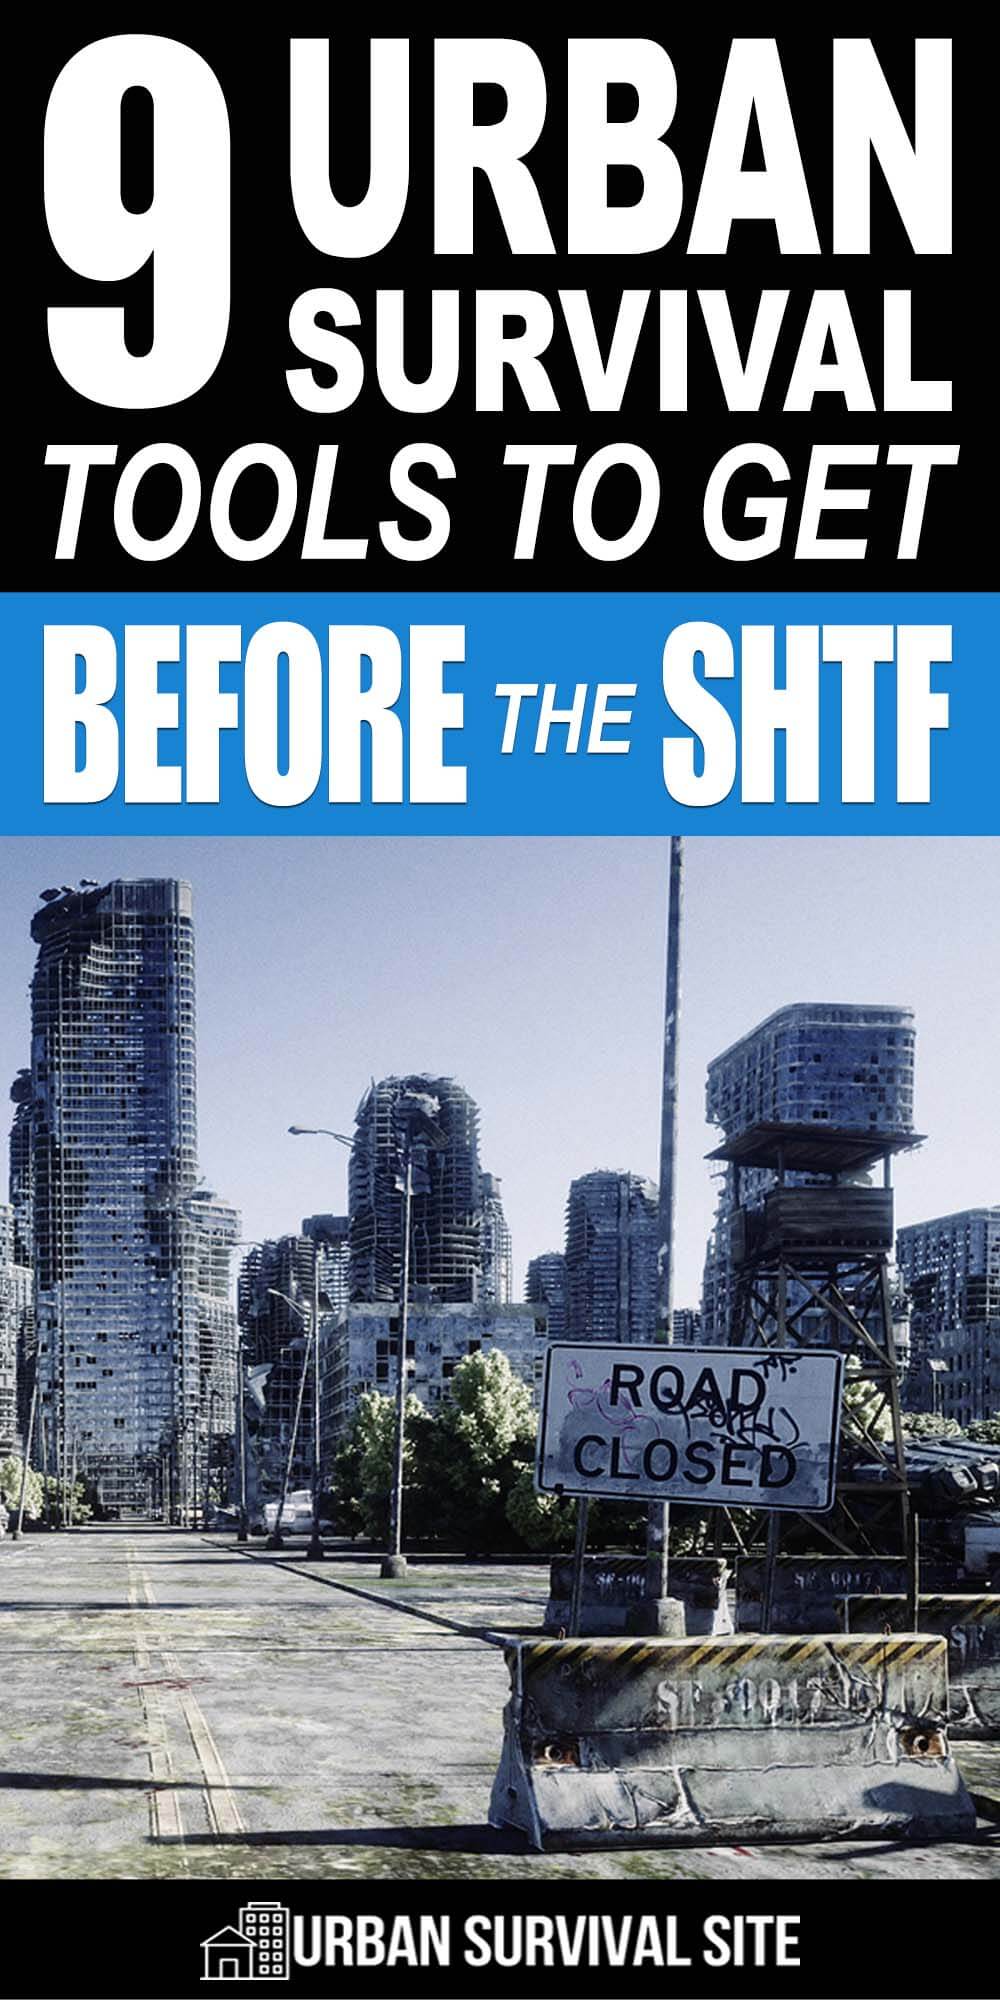 9 Urban Survival Tools To Get Before The SHTF